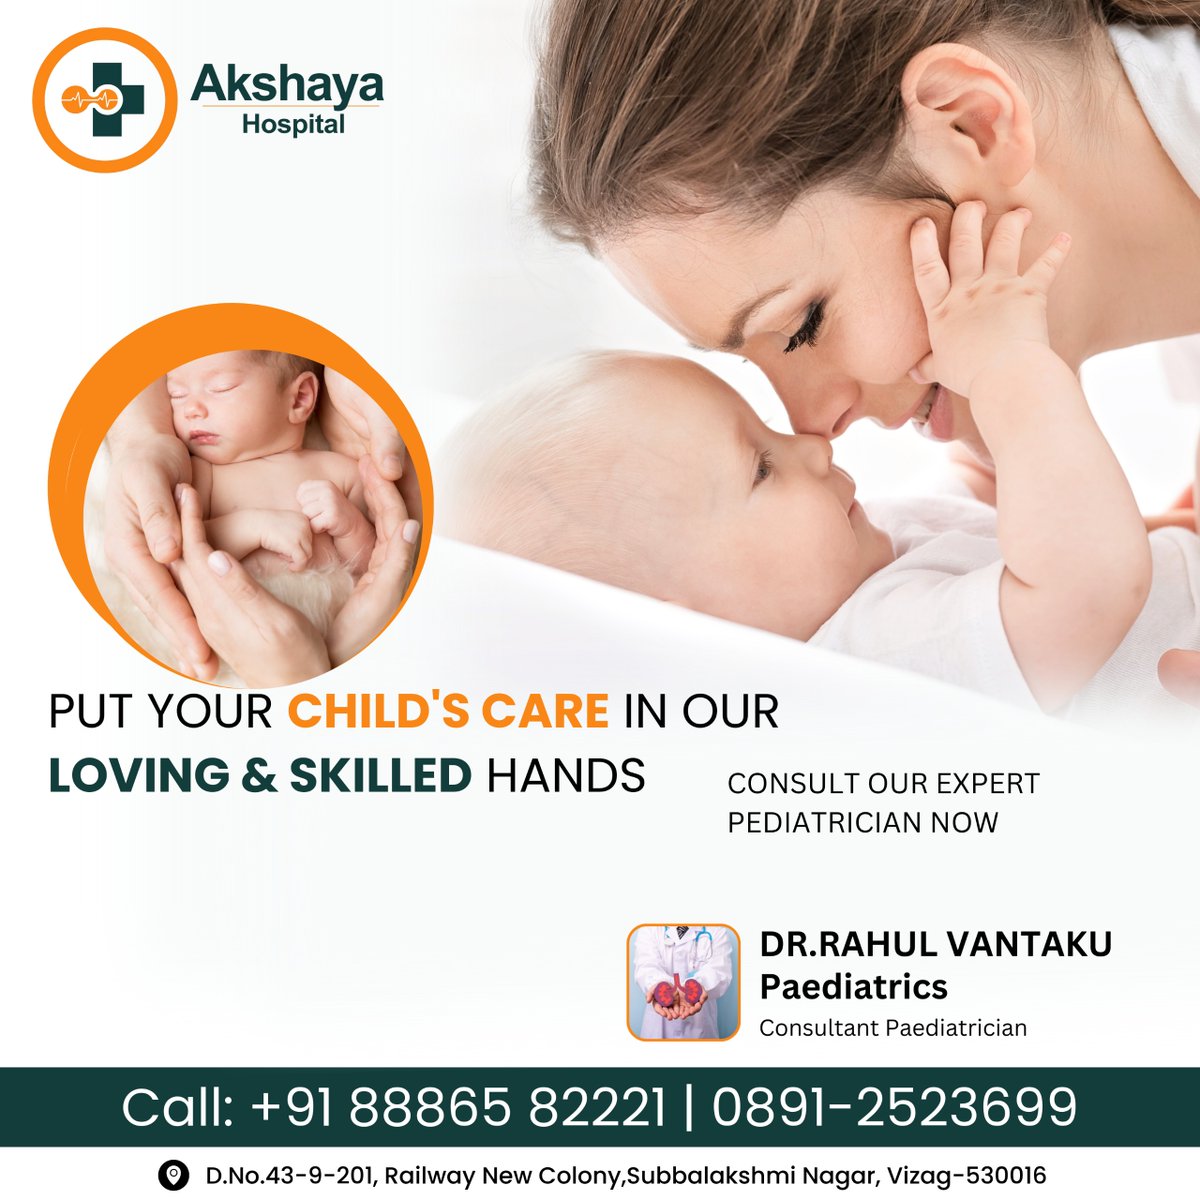 Nurturing Smiles, Healing Hearts at Akshaya Hospital Pediatrics! 💖 Because every tiny heartbeat deserves the best care. 👶✨ 

Contact Us:
📞 Phone: 88865 82221 | 0891-2523699

#AkshayaHospital #Paediatrics #ChildHealth #CaringHands #TinyPatients #HealthForKids #LittleMiracles